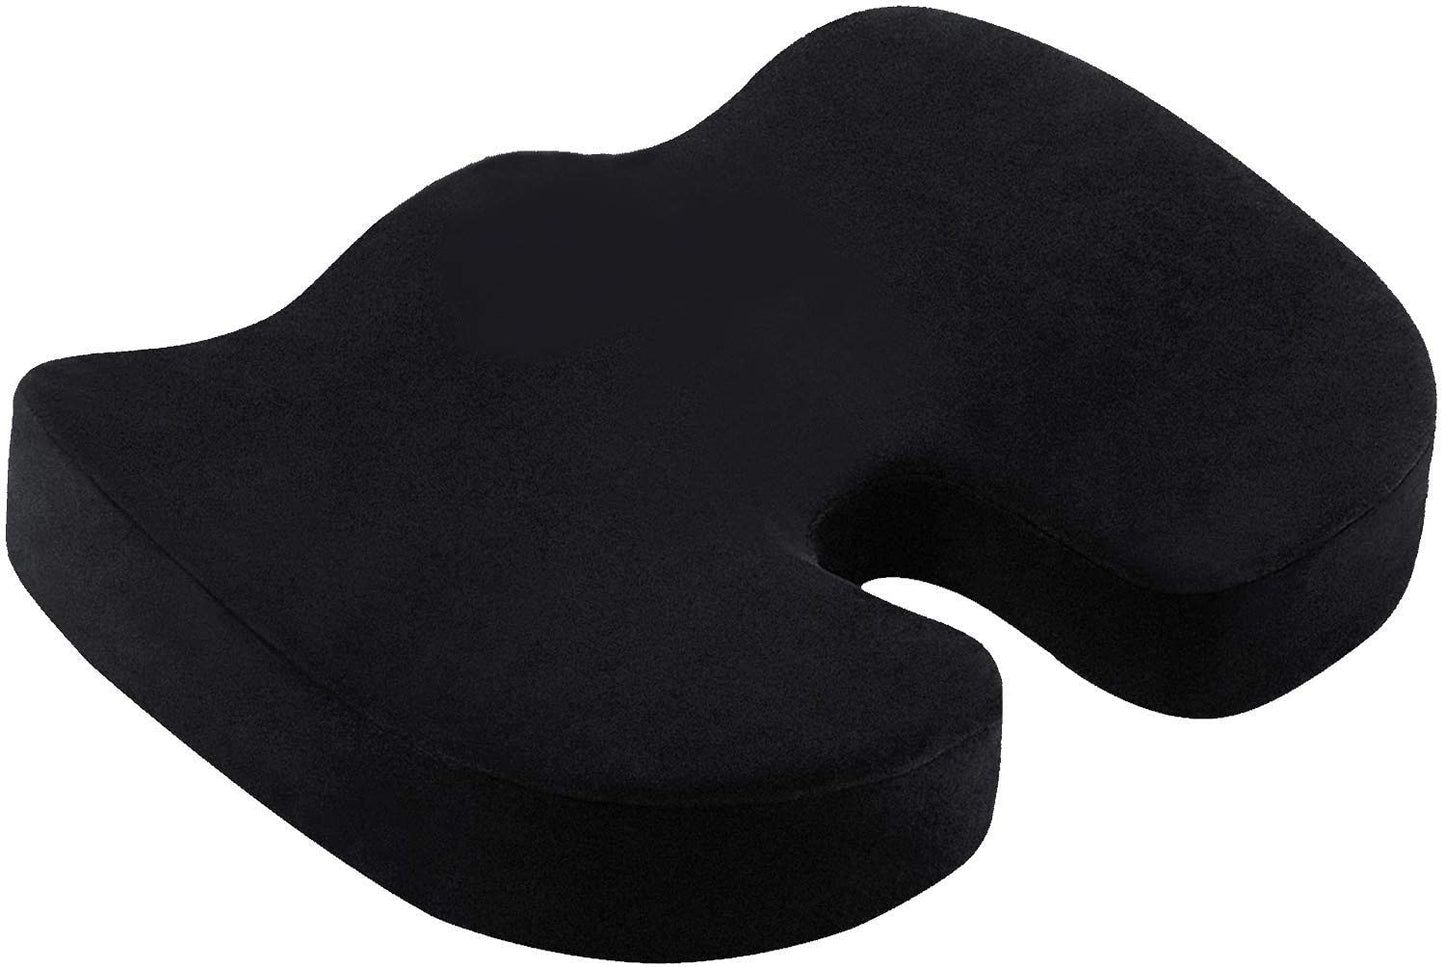 Oshotto Orthopedic Memory Foam Coccyx Seat Cushion for Tailbone, Sciatica Pain Relief Hip Support For Office, Cars, Chair